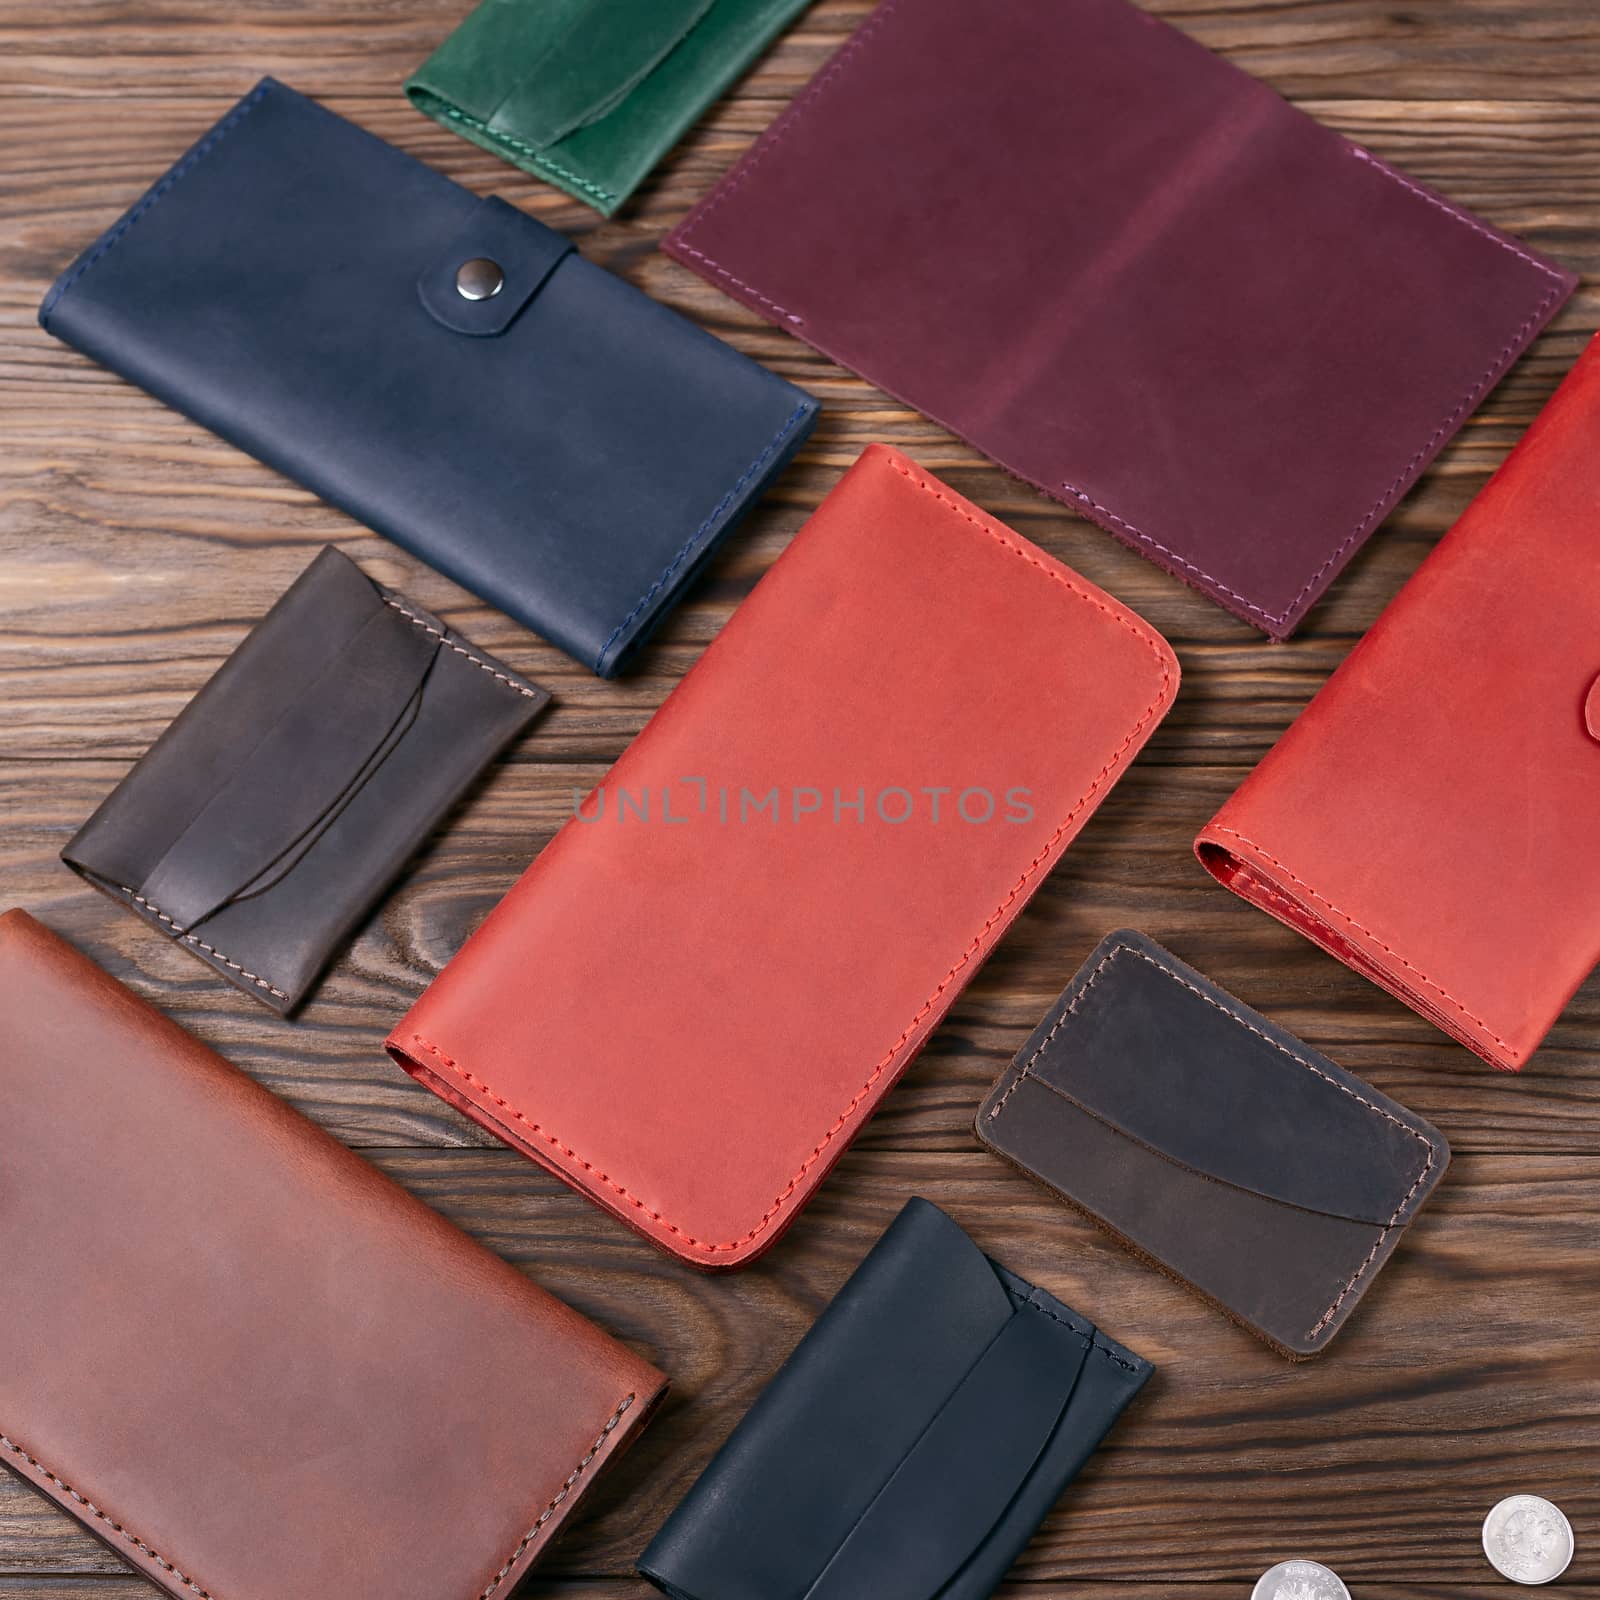 Red color handmade leather porte-monnaie surrounded by other leather accessories on wooden textured background. Side view. Stock photo of luxury accessories.